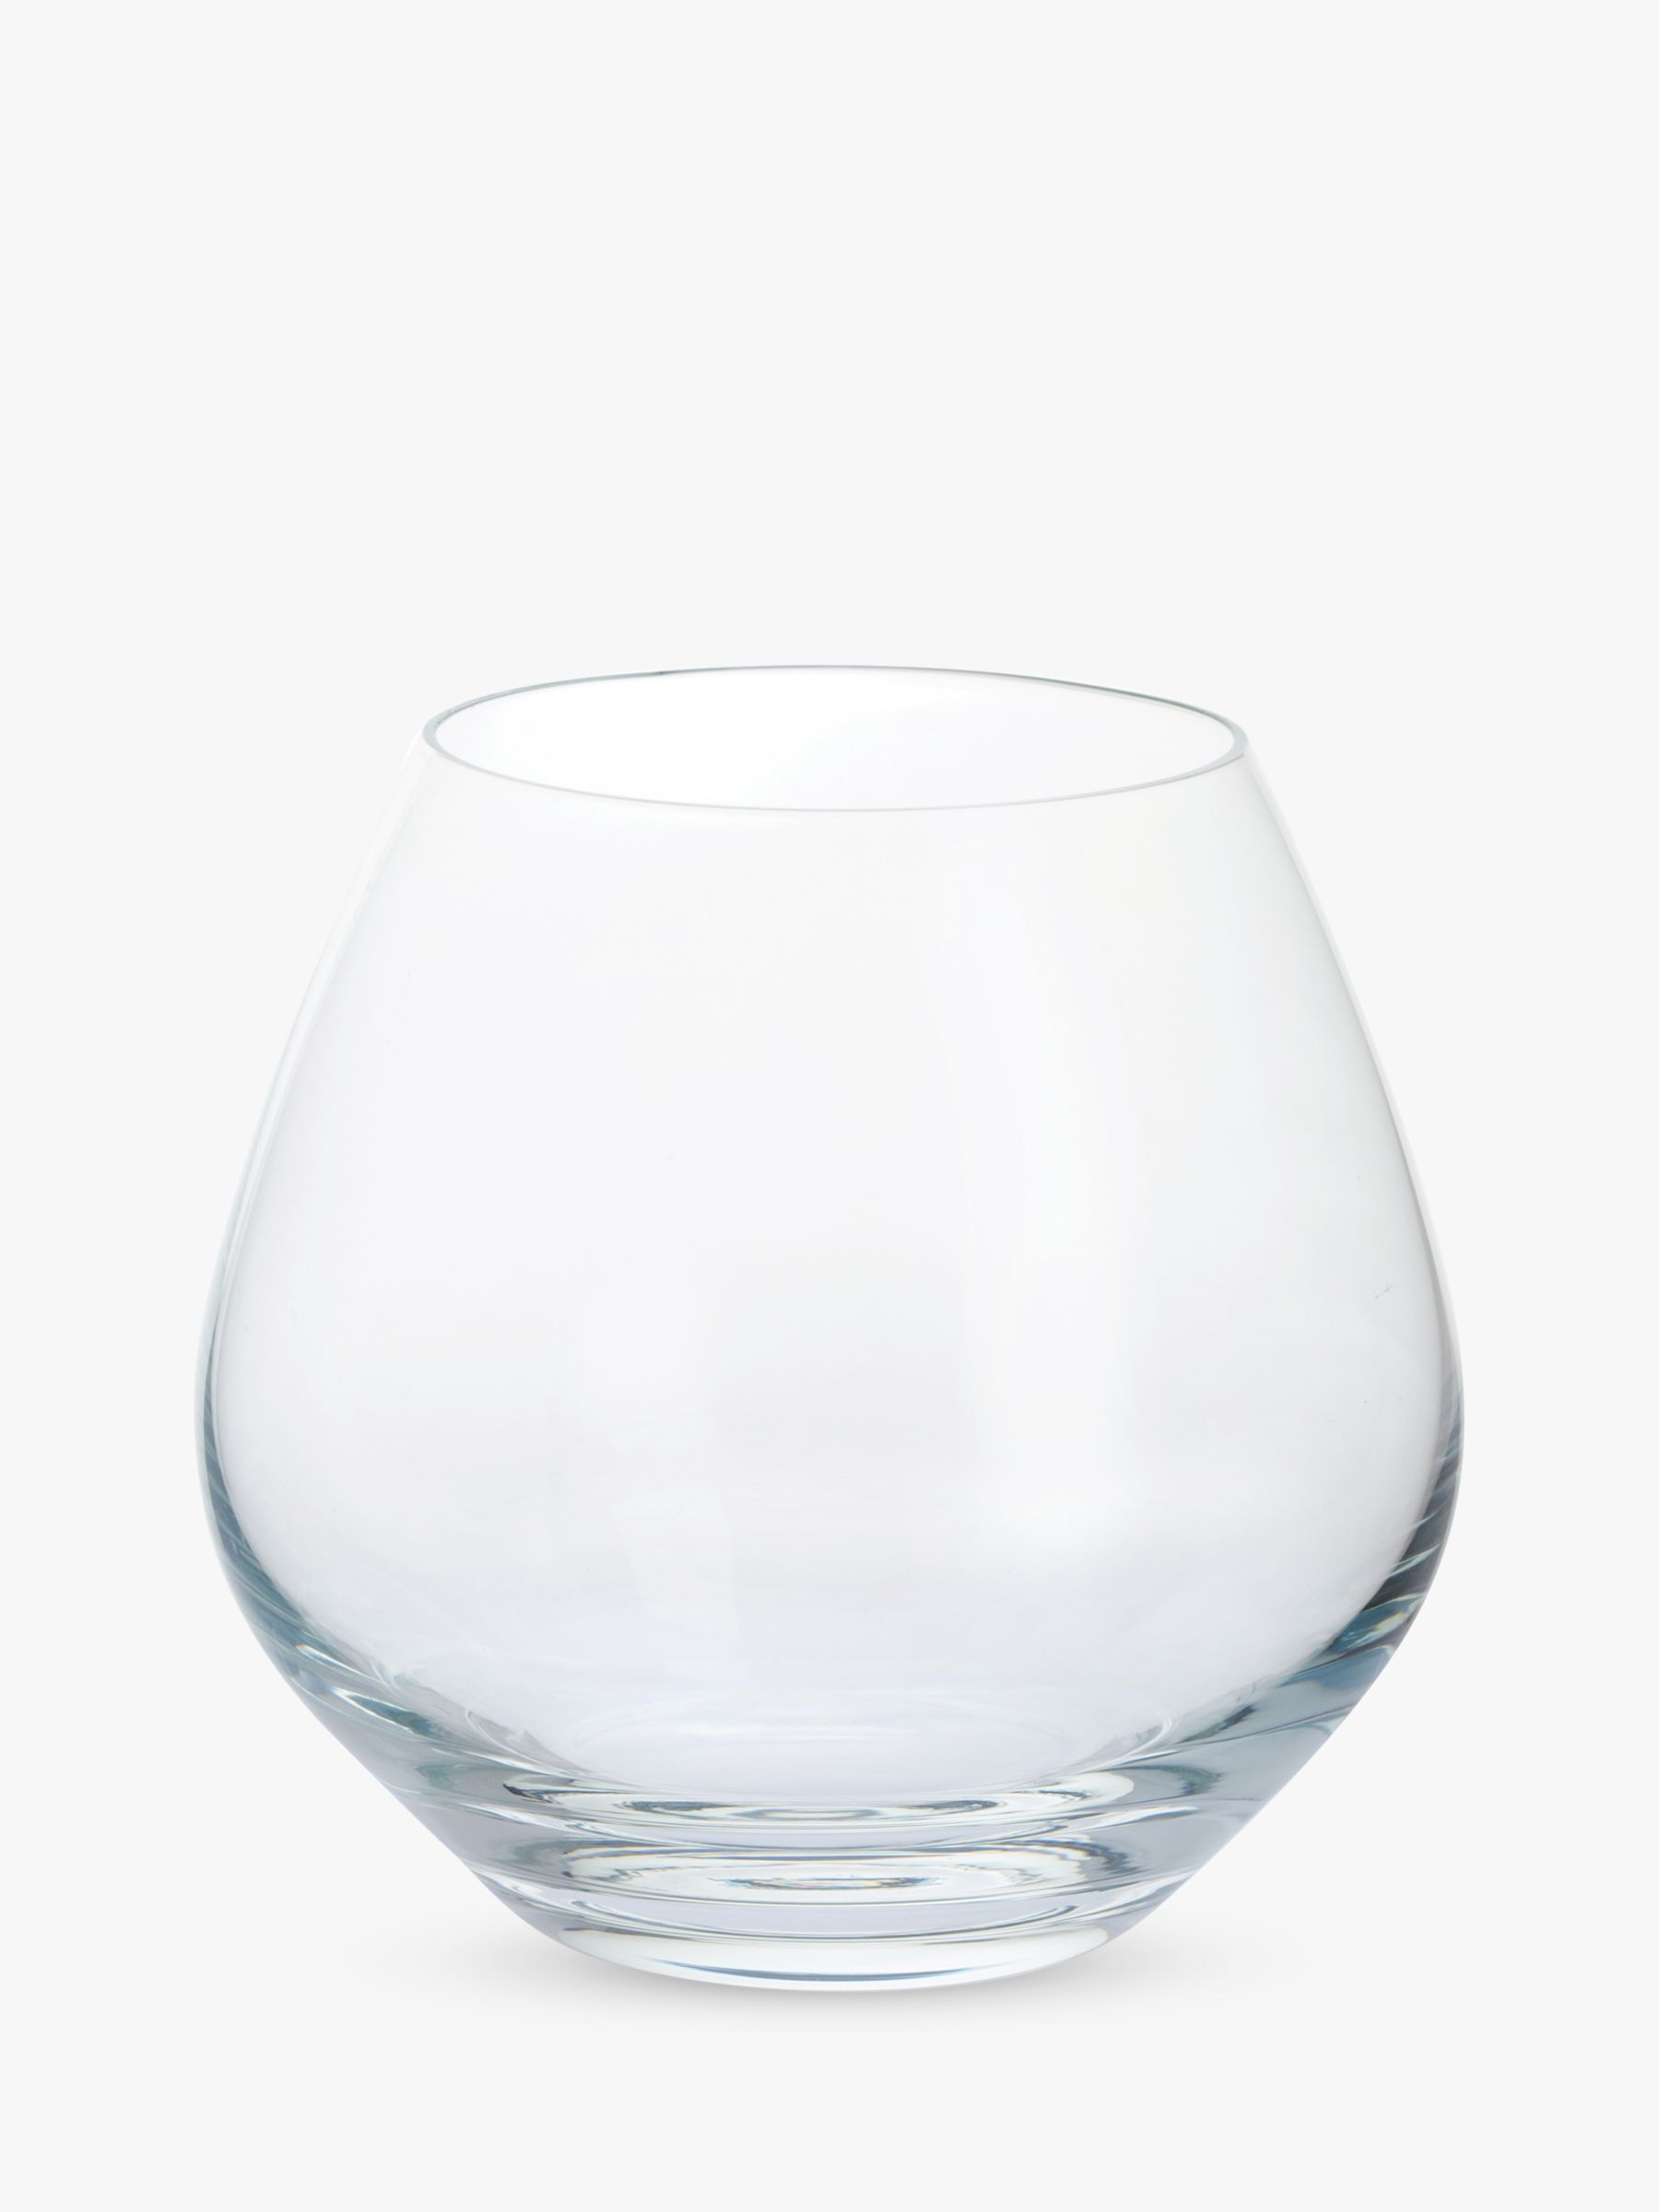 Dartington Crystal Stemless Gin Copa Glasses, Clear, 440ml, Set of 6